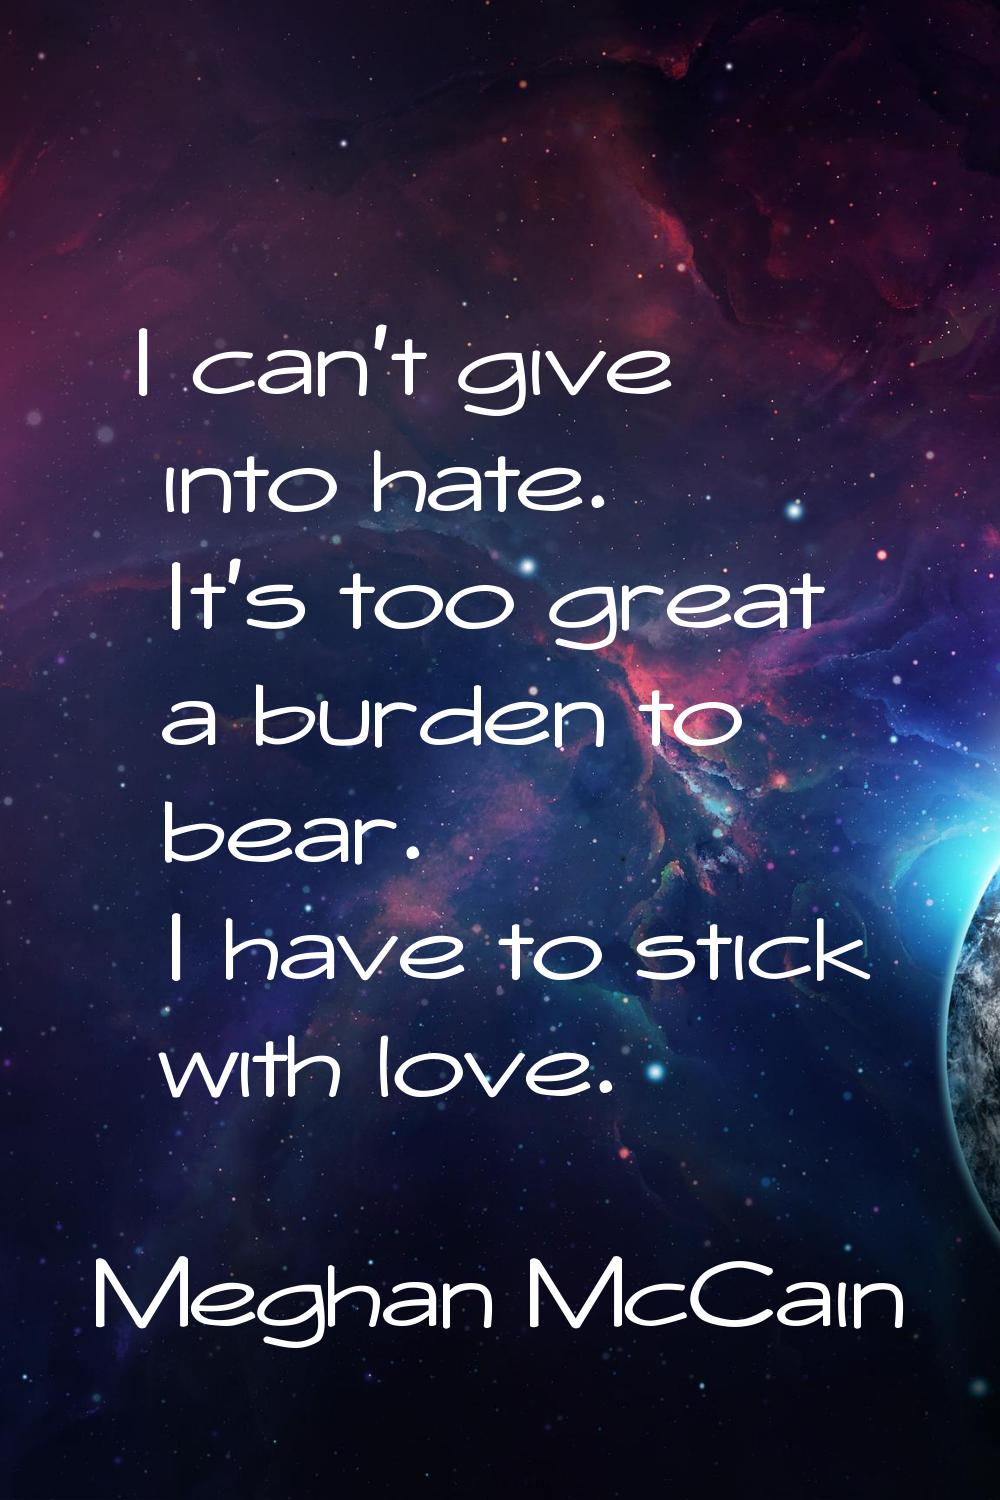 I can't give into hate. It's too great a burden to bear. I have to stick with love.